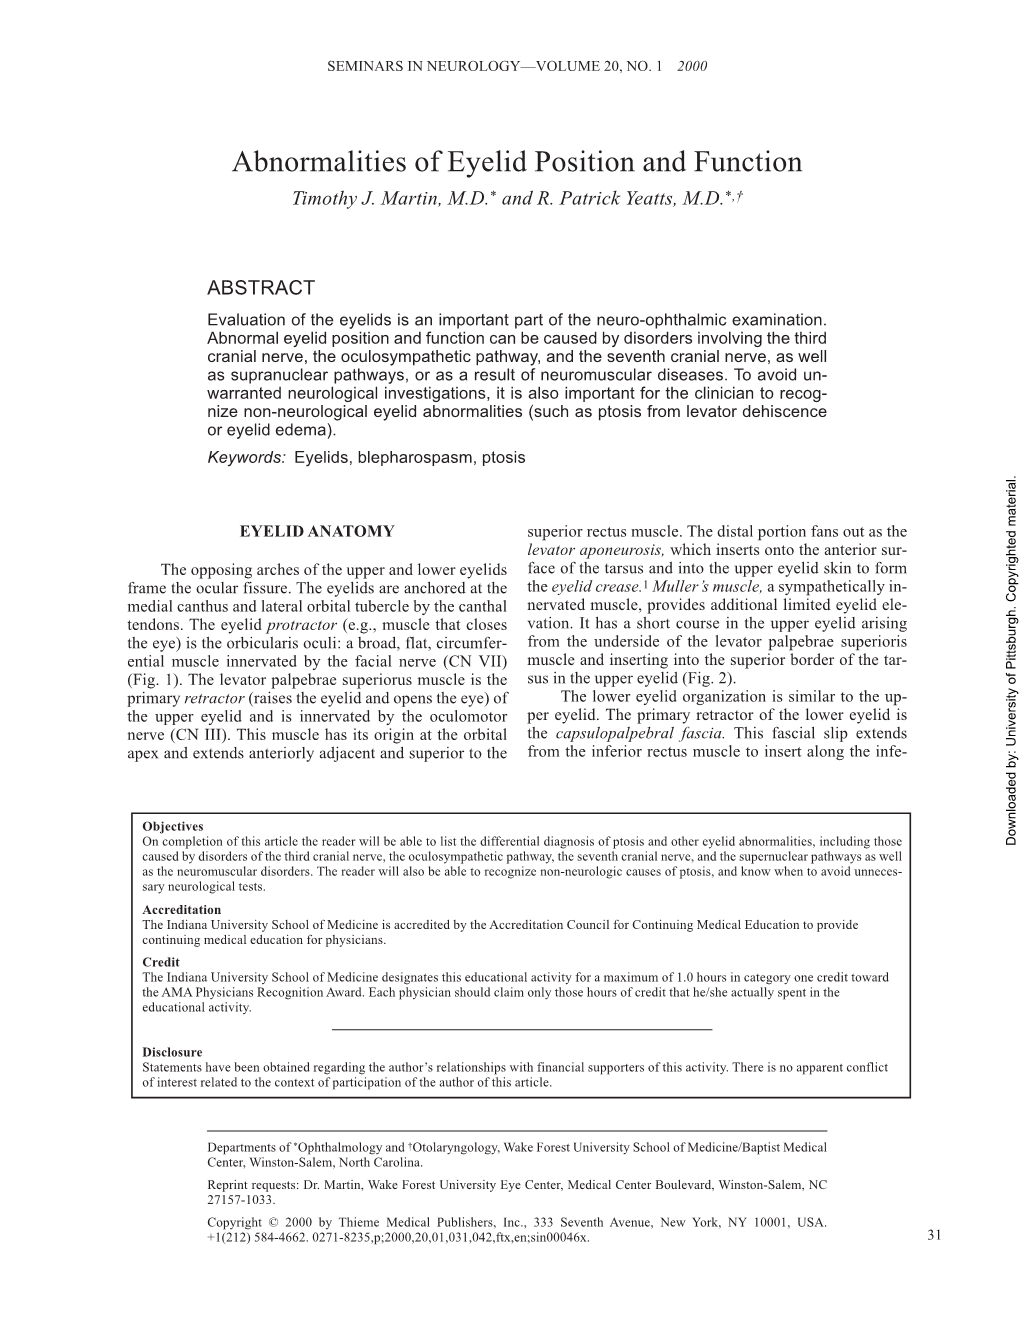 Abnormalities of Eyelid Position and Function Timothy J